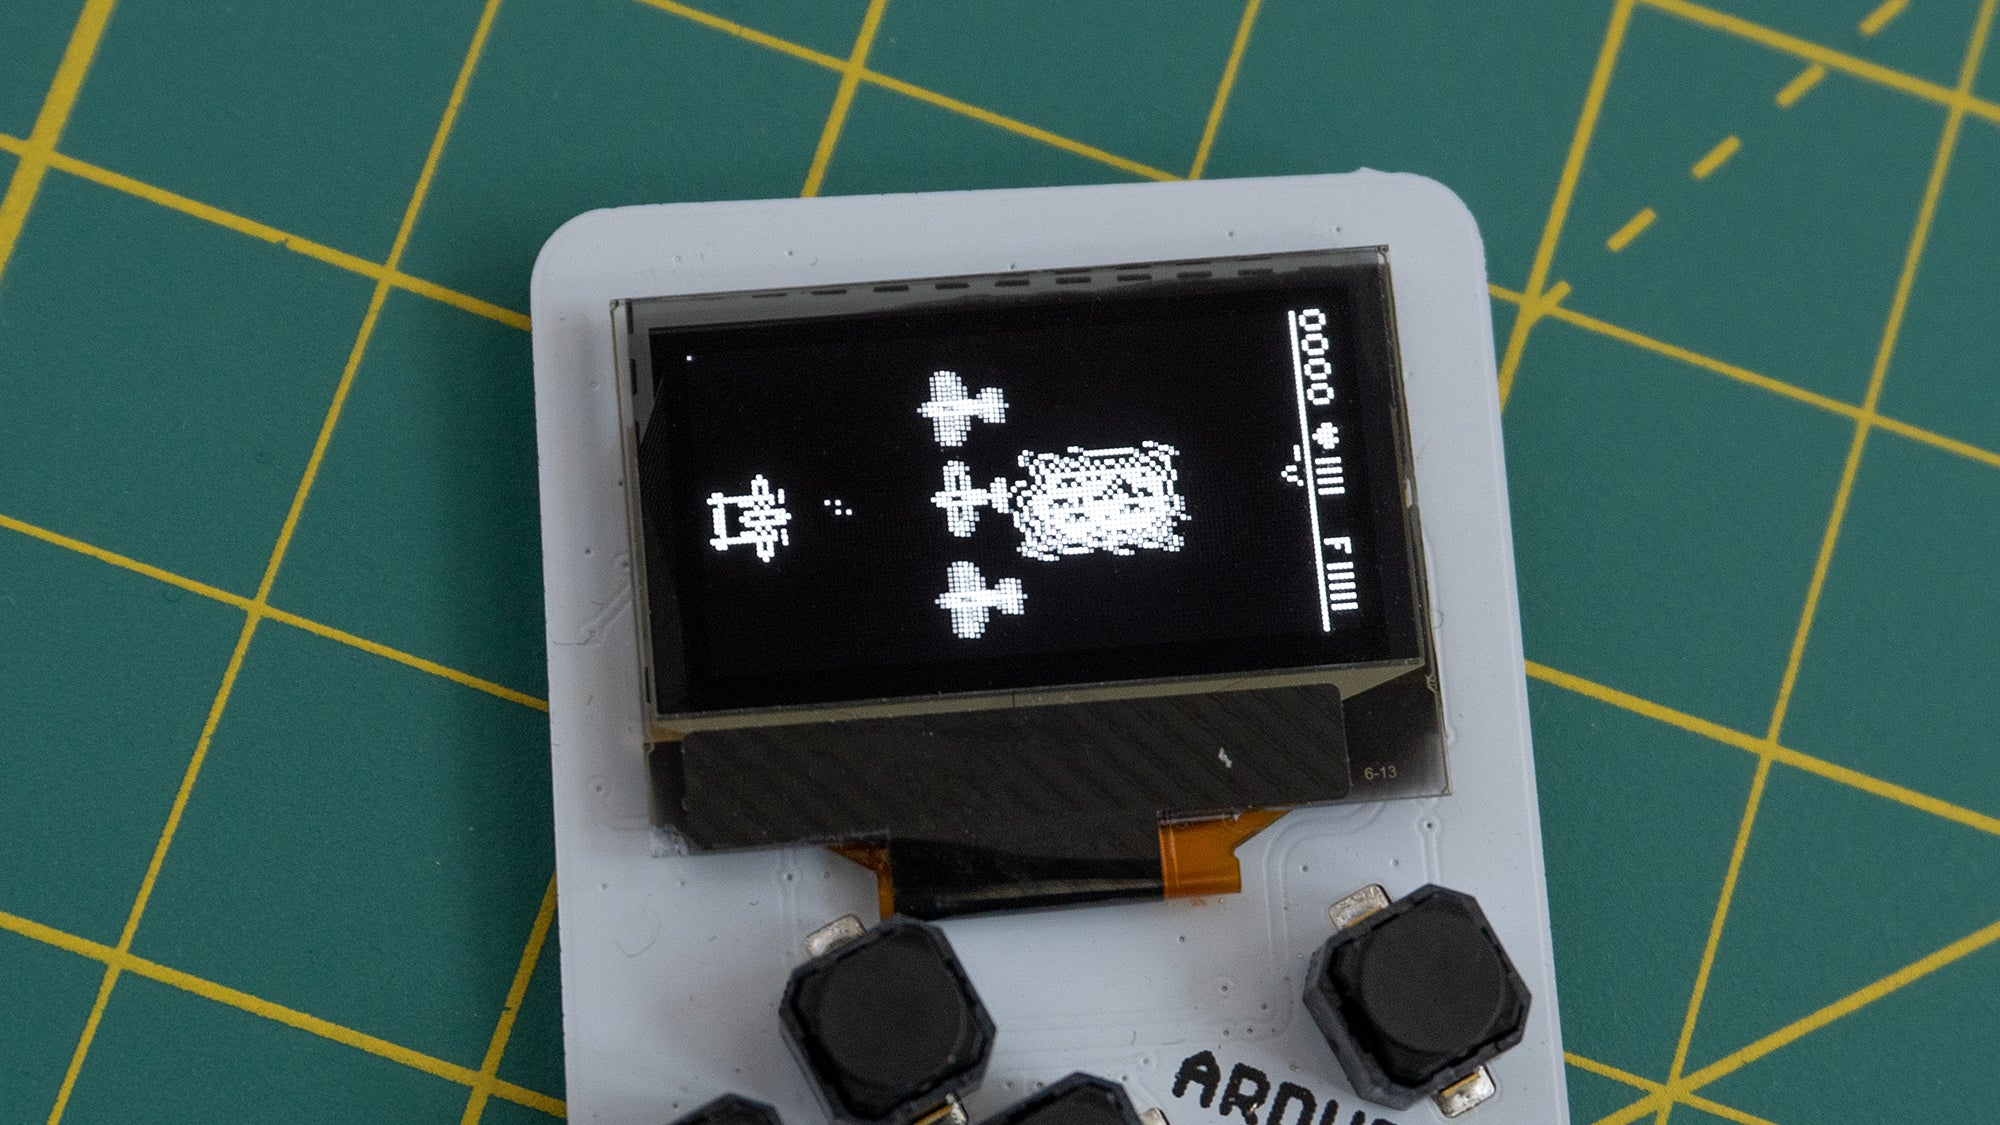 The Arduboy Mini uses a monochromatic OLED screen which can only display black and white images — no grayscale. (Photo: Andrew Liszewski | Gizmodo)